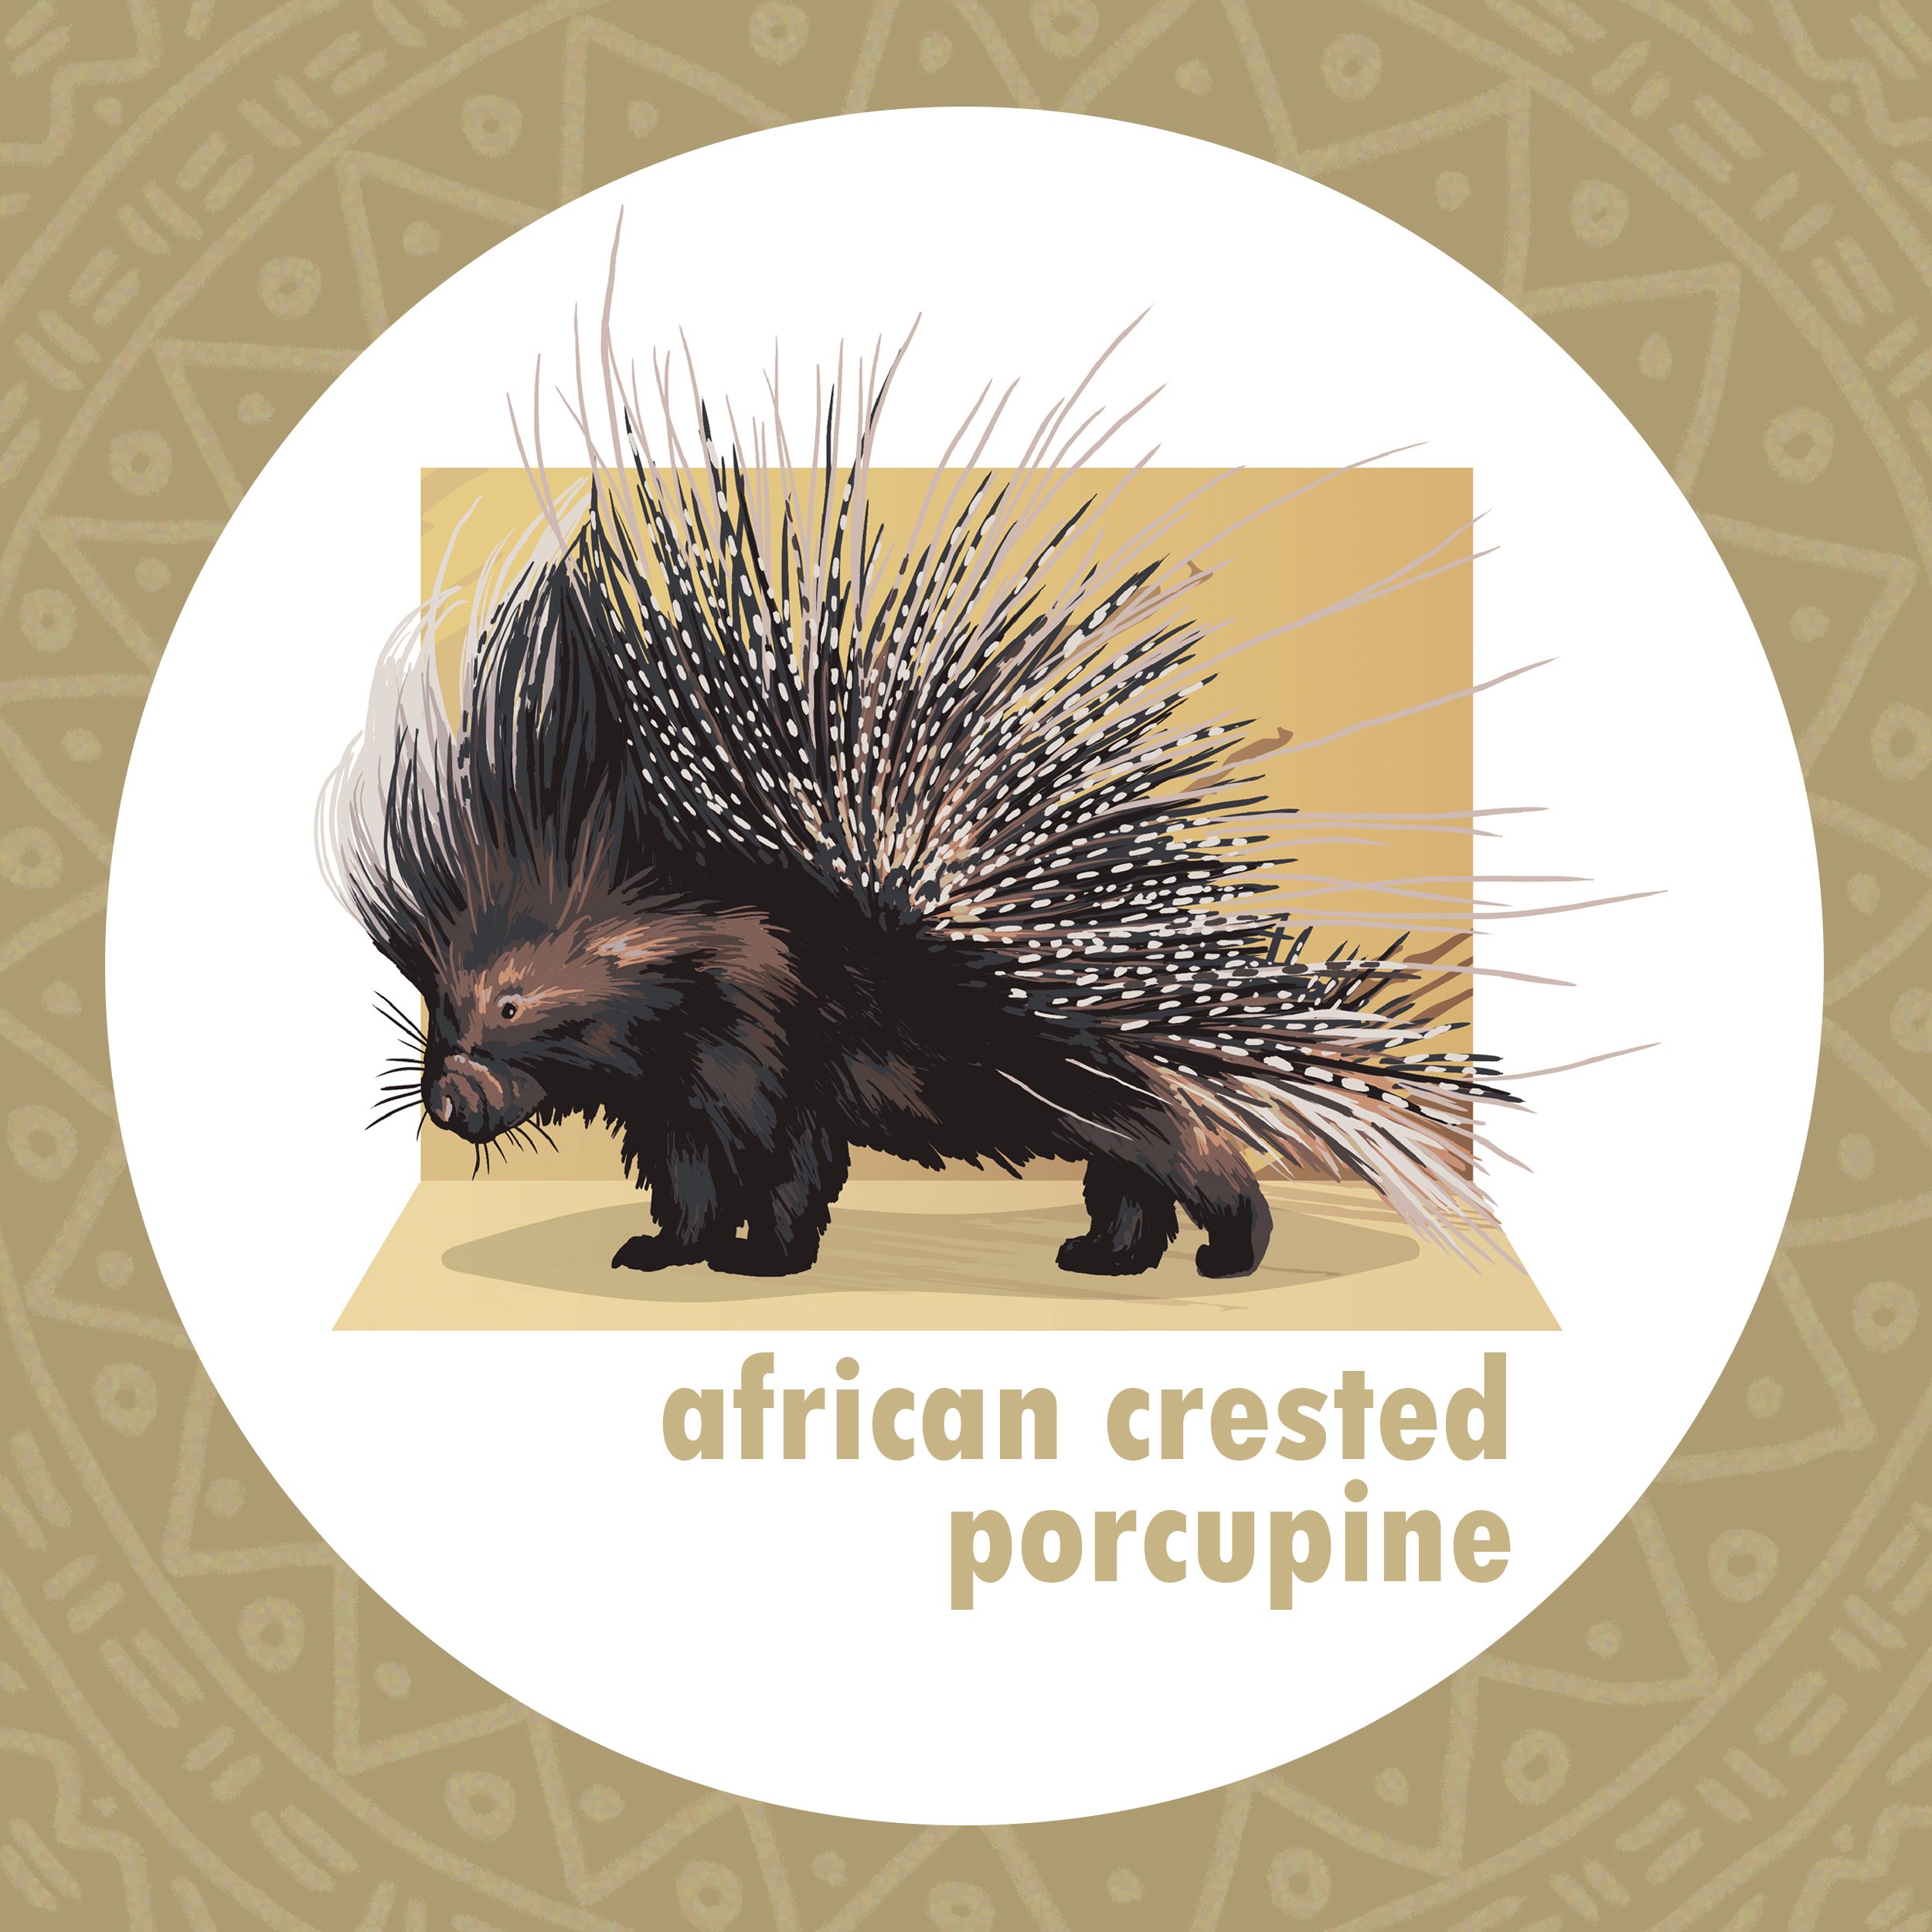 Zoo_African Crested Porcupine.jpg